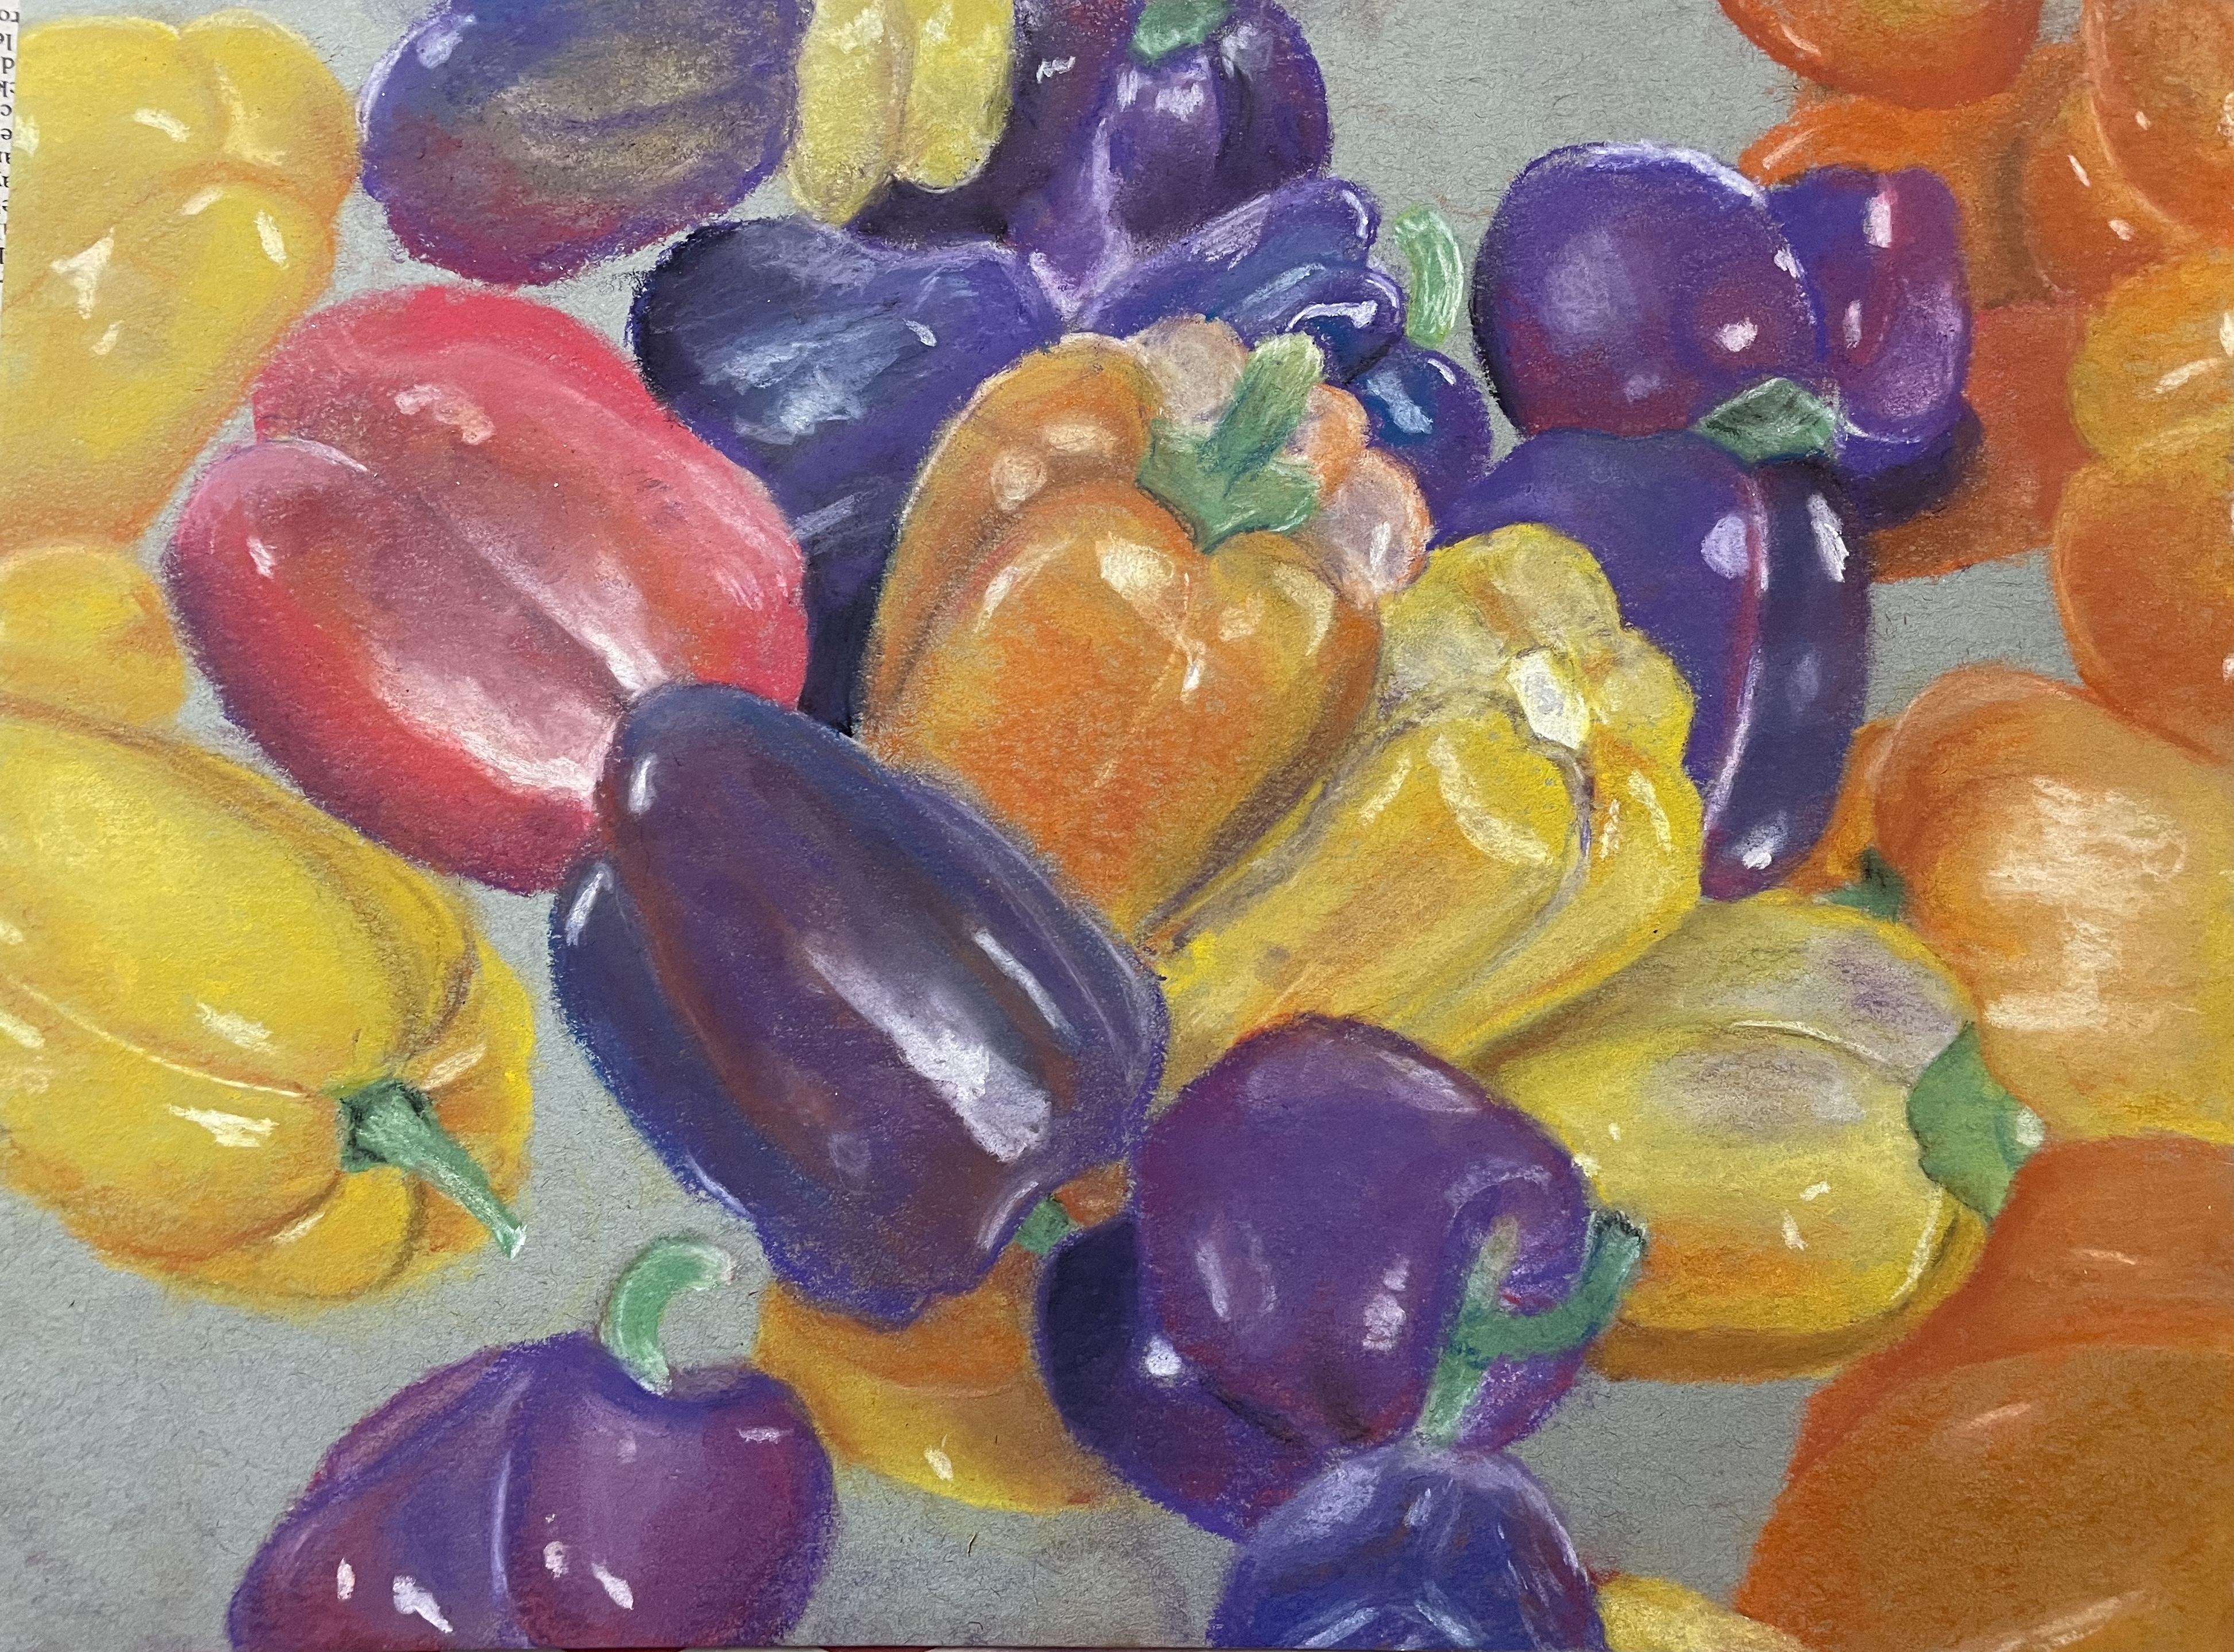 View Image Details Peppers in pastel by Natalie